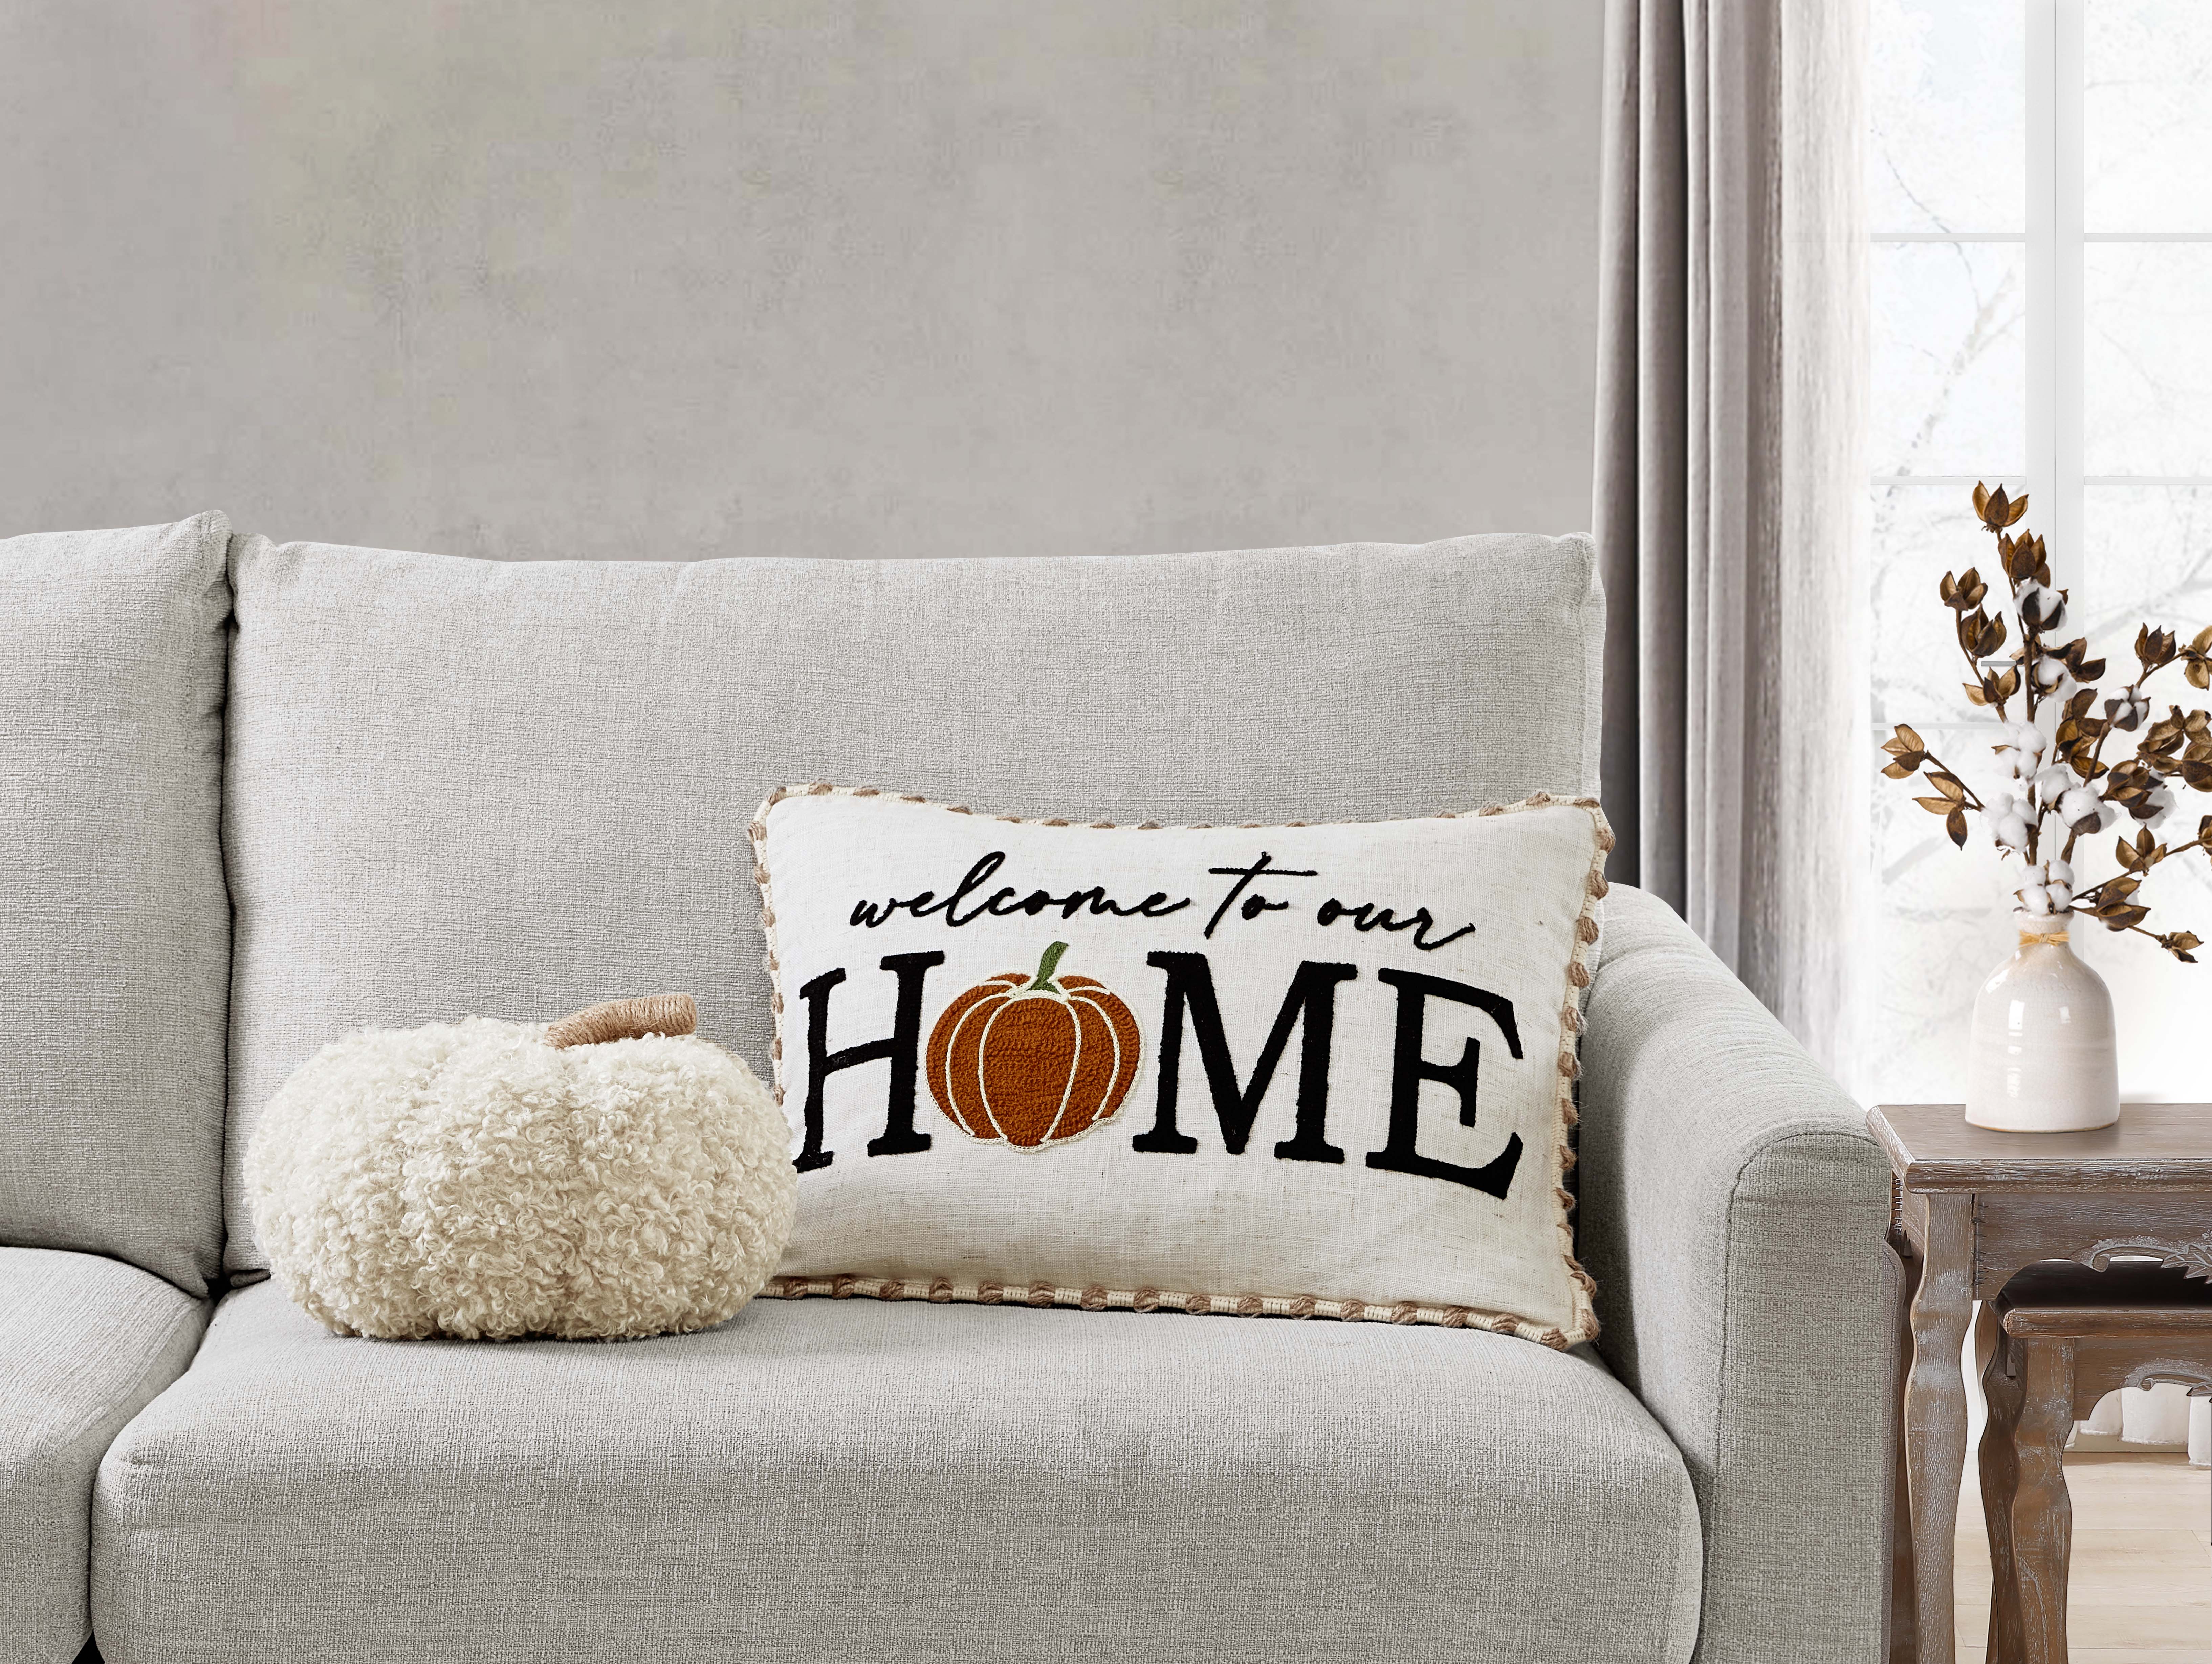 Mainstays, Shaped Pumpkin Decorative Throw Pillow, Shaped, 7.5" x 11.5", Ivory, 1 Pack - image 3 of 4